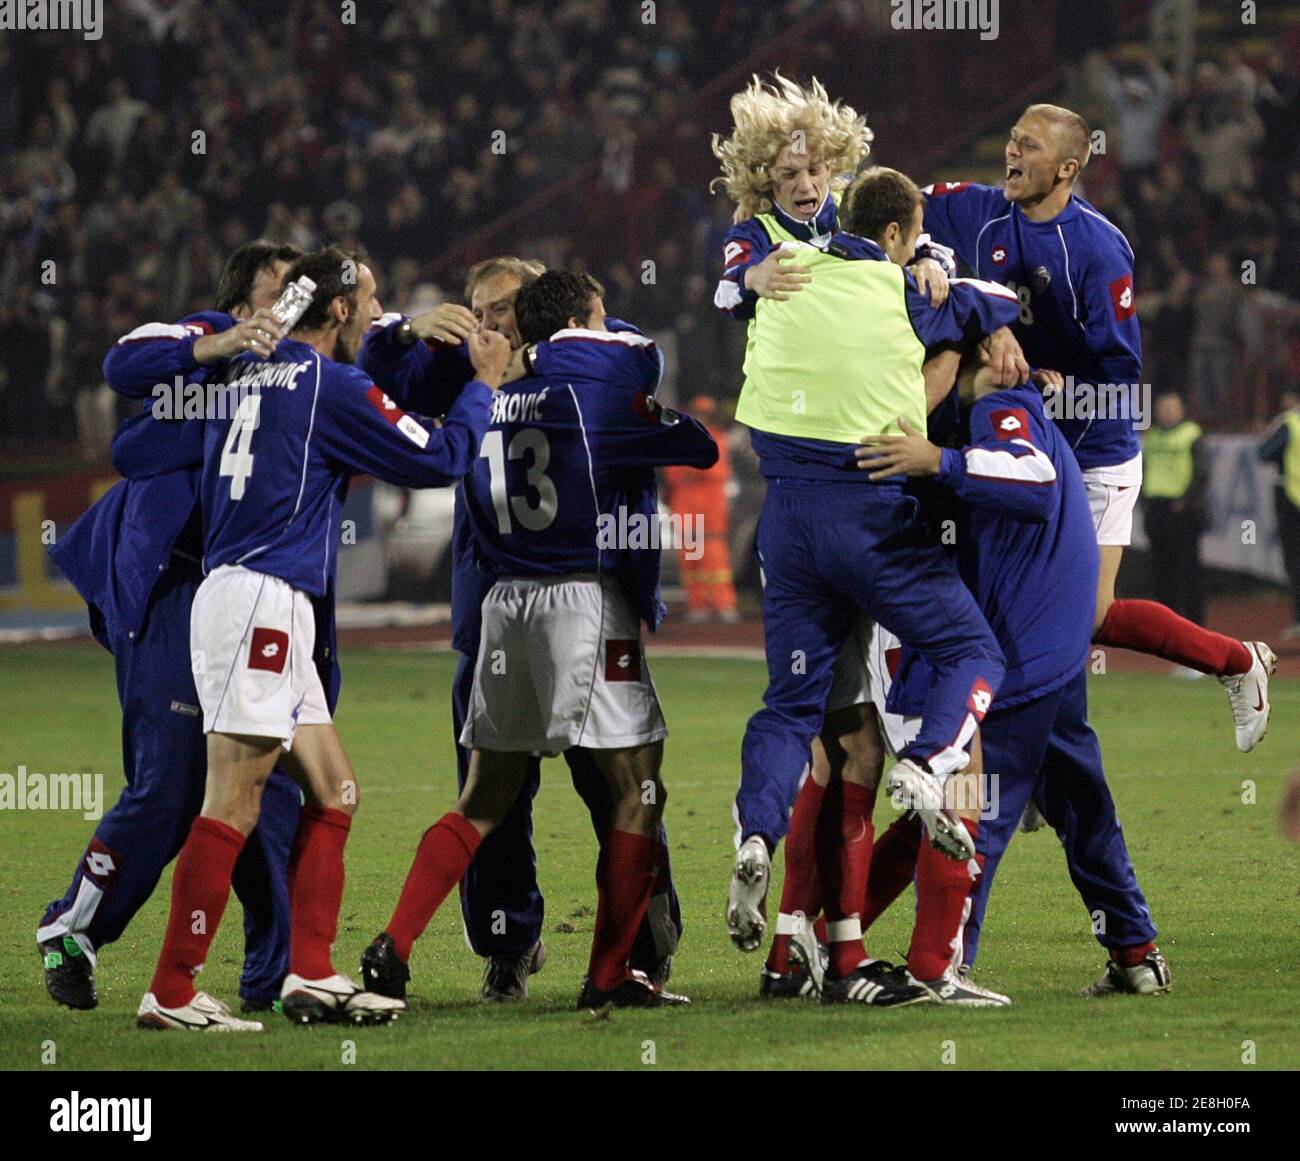 Serbia and Montenegro's players celebrate their win over Bosnia after their World Cup 2006 qualifying soccer match in Belgrade October 12, 2005. REUTERS/Ivan Milutinovic Stock Photo